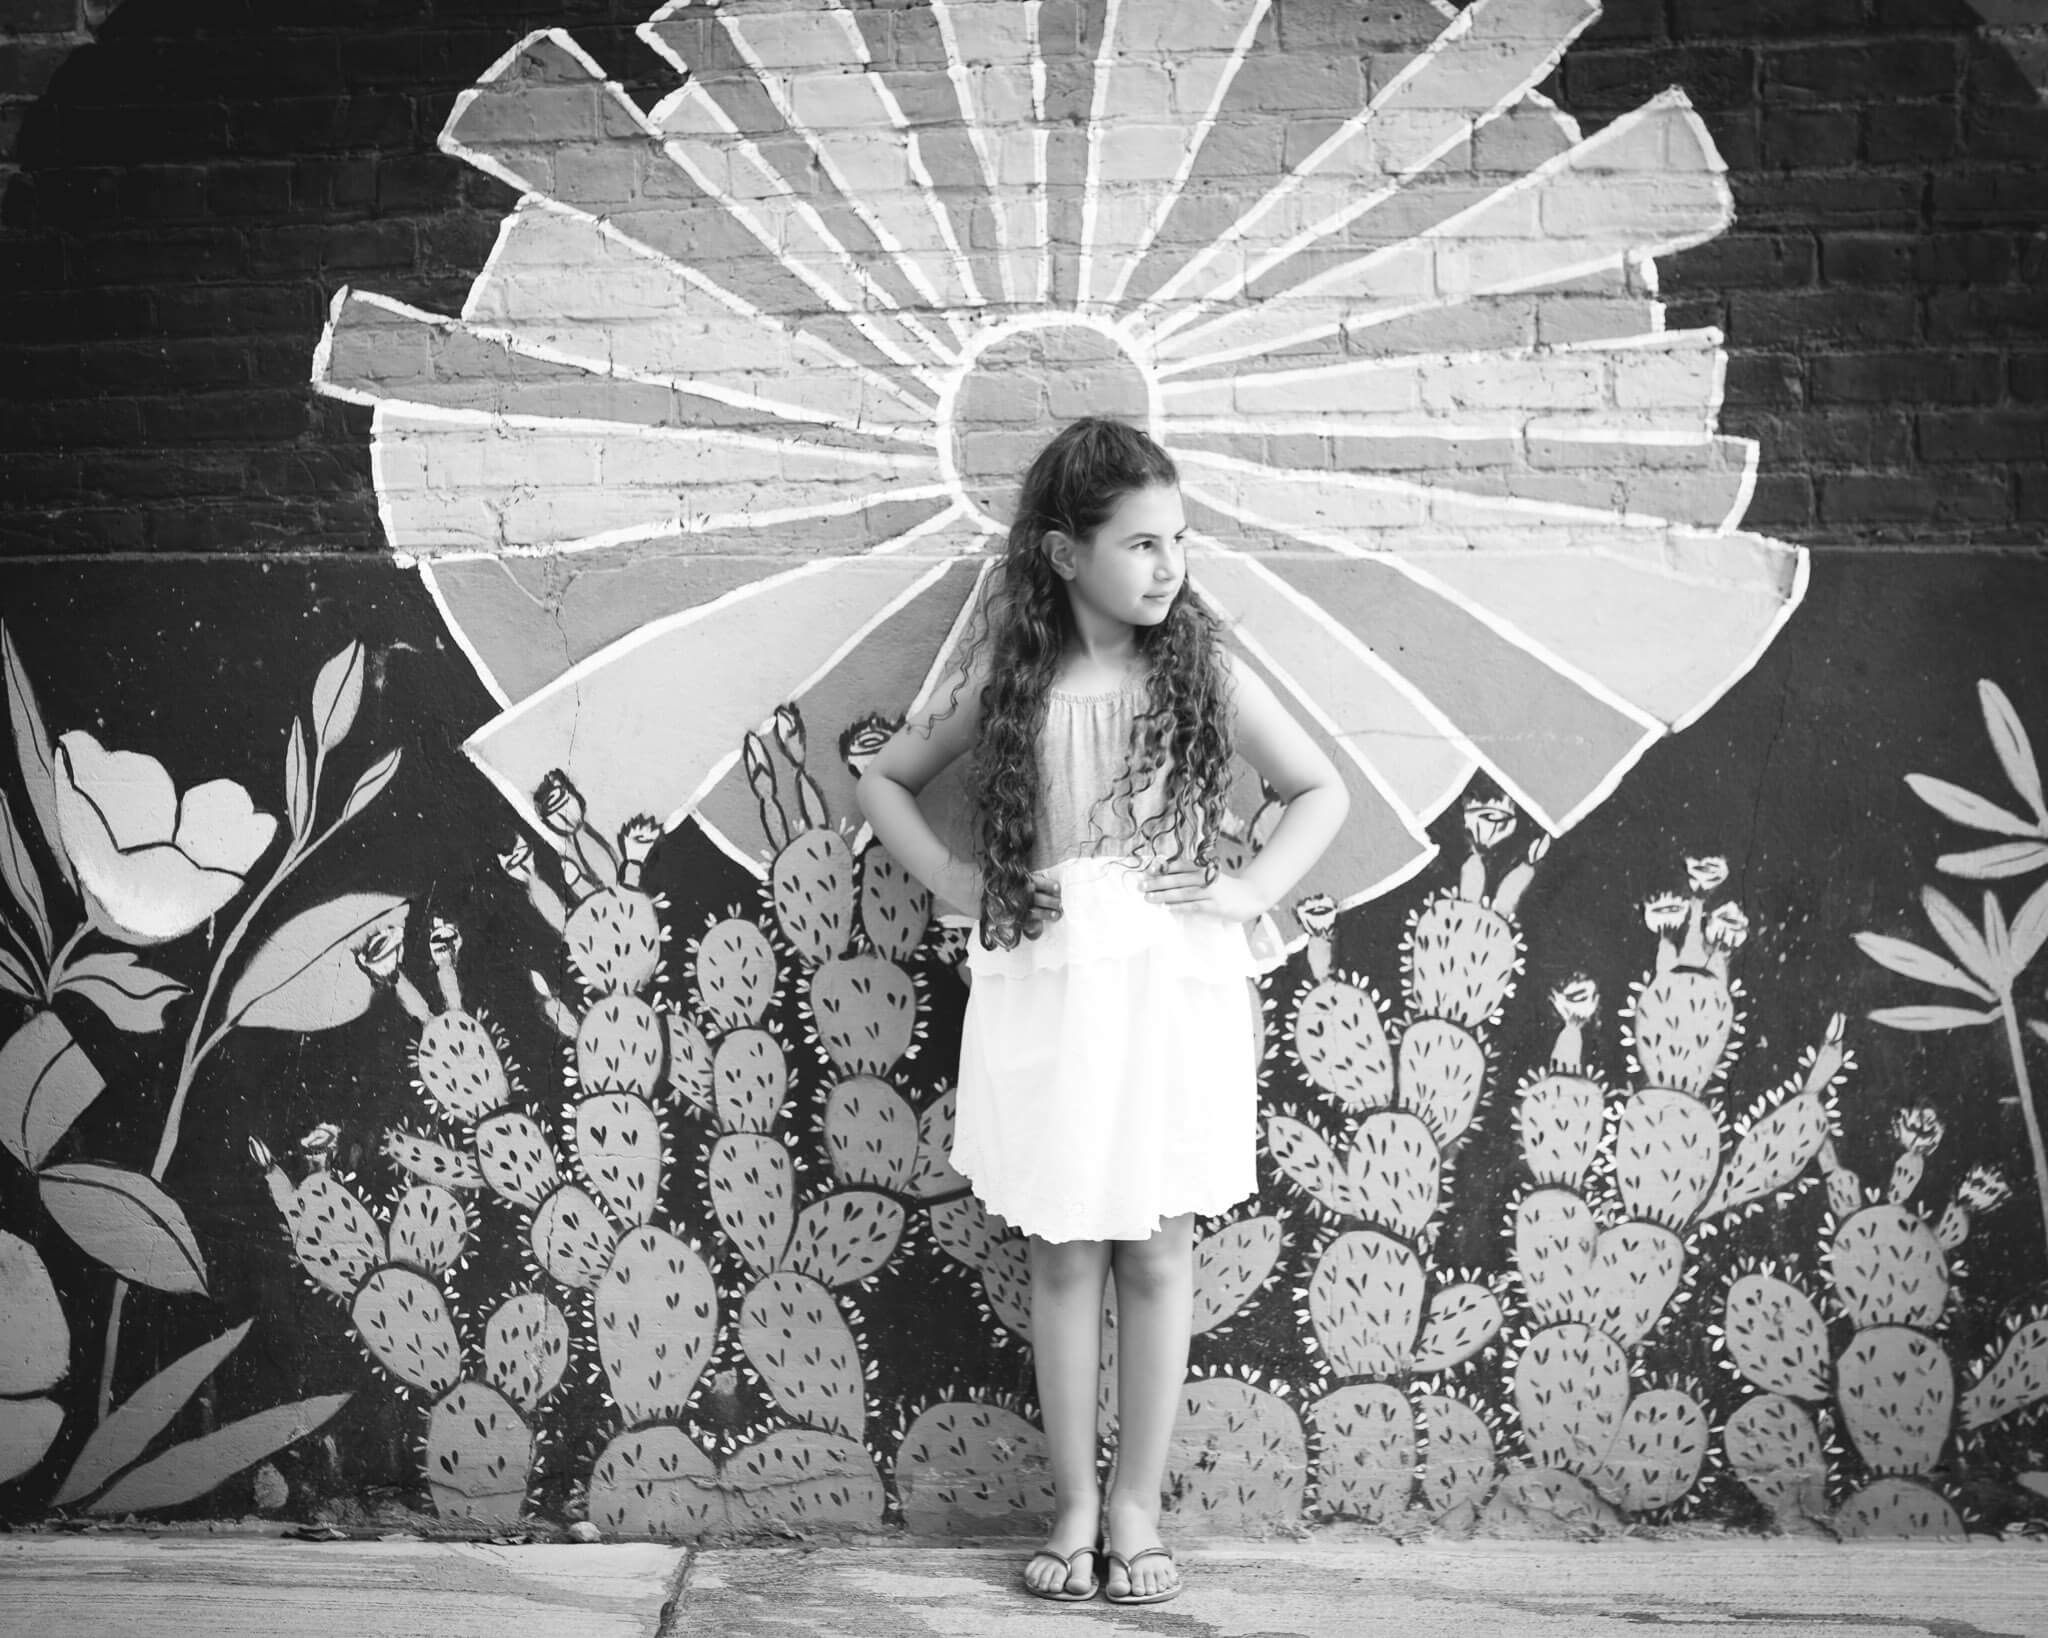 B&W photo of a young girl in Downtown in front of a mural